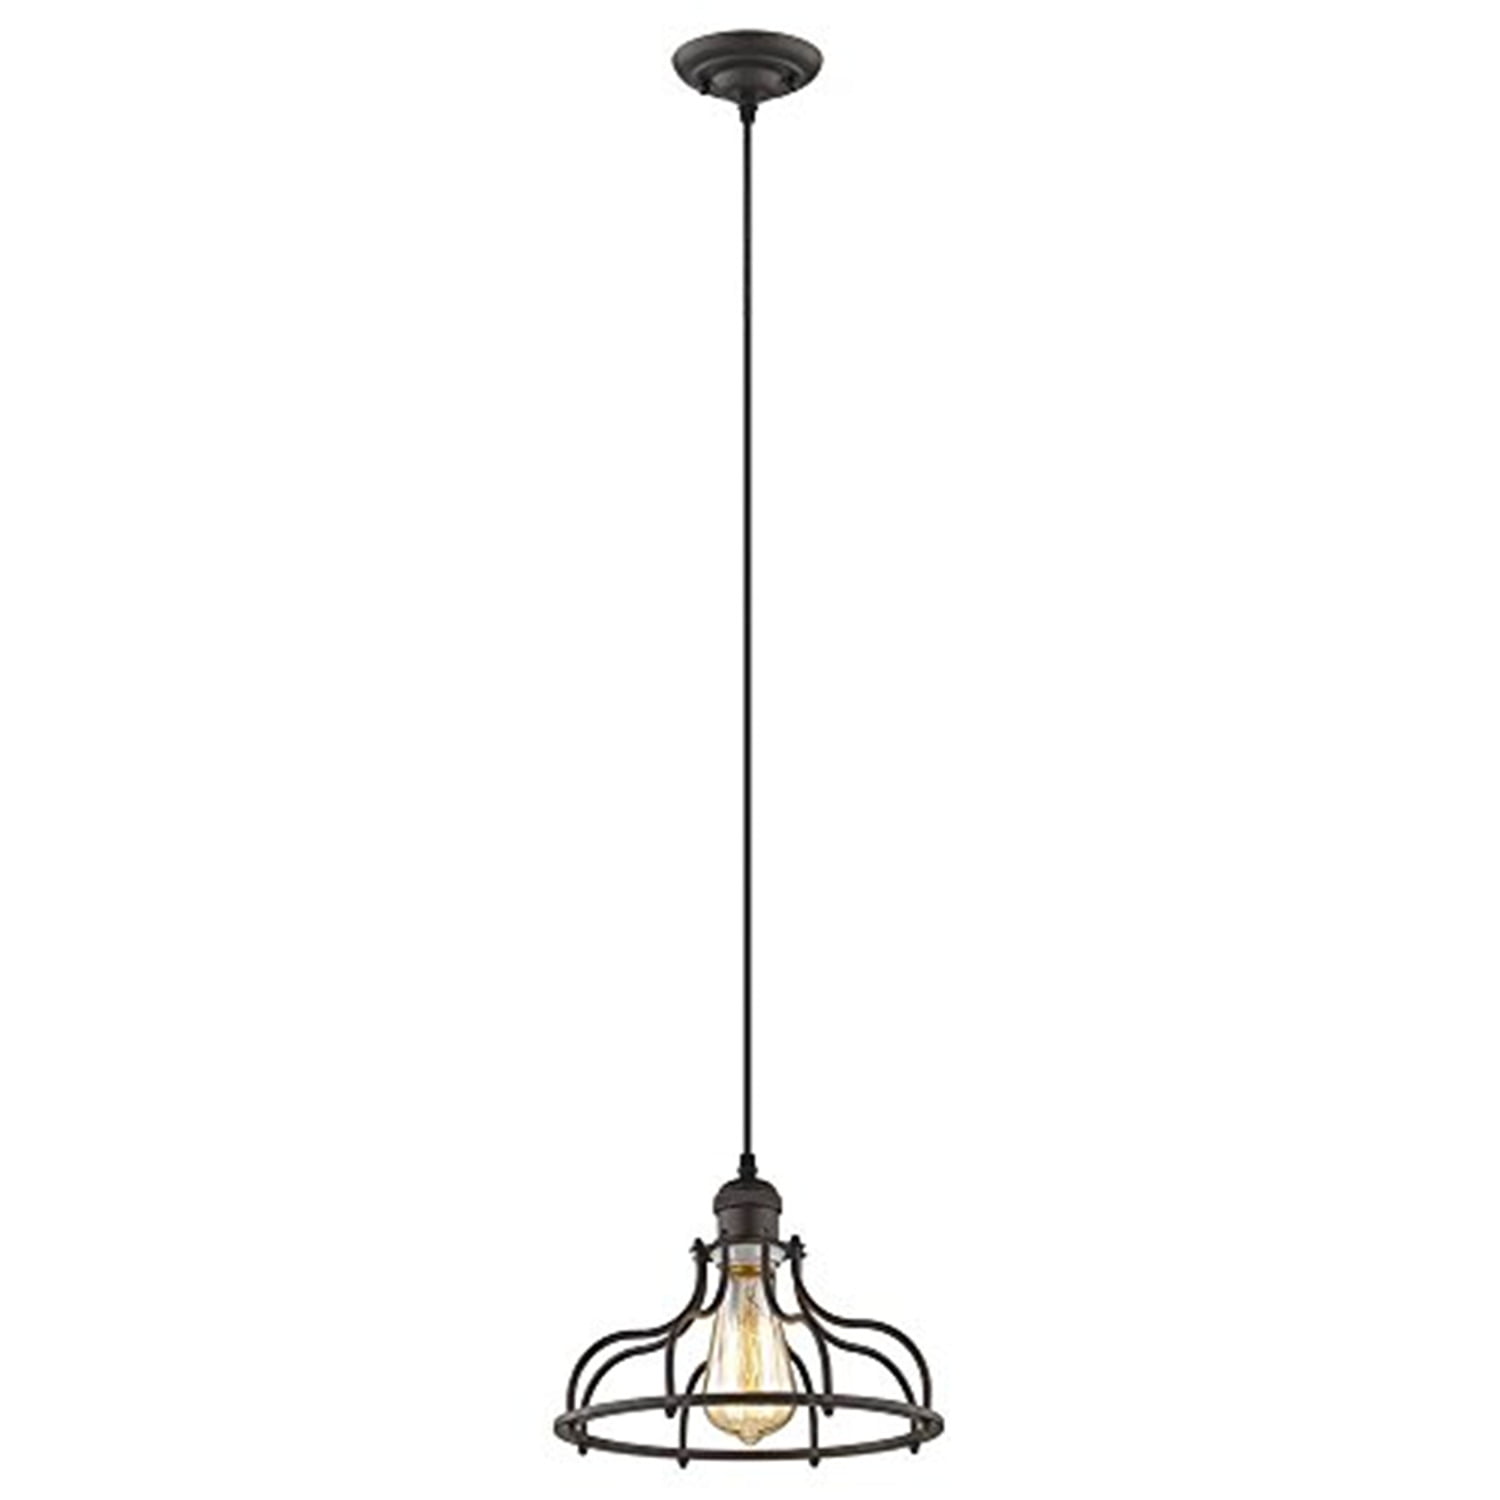 Ch2d004rb10-dp1 Jaxon Industrial-style 1 Light Rubbed Bronze Ceiling Mini Pendant - 10 In.